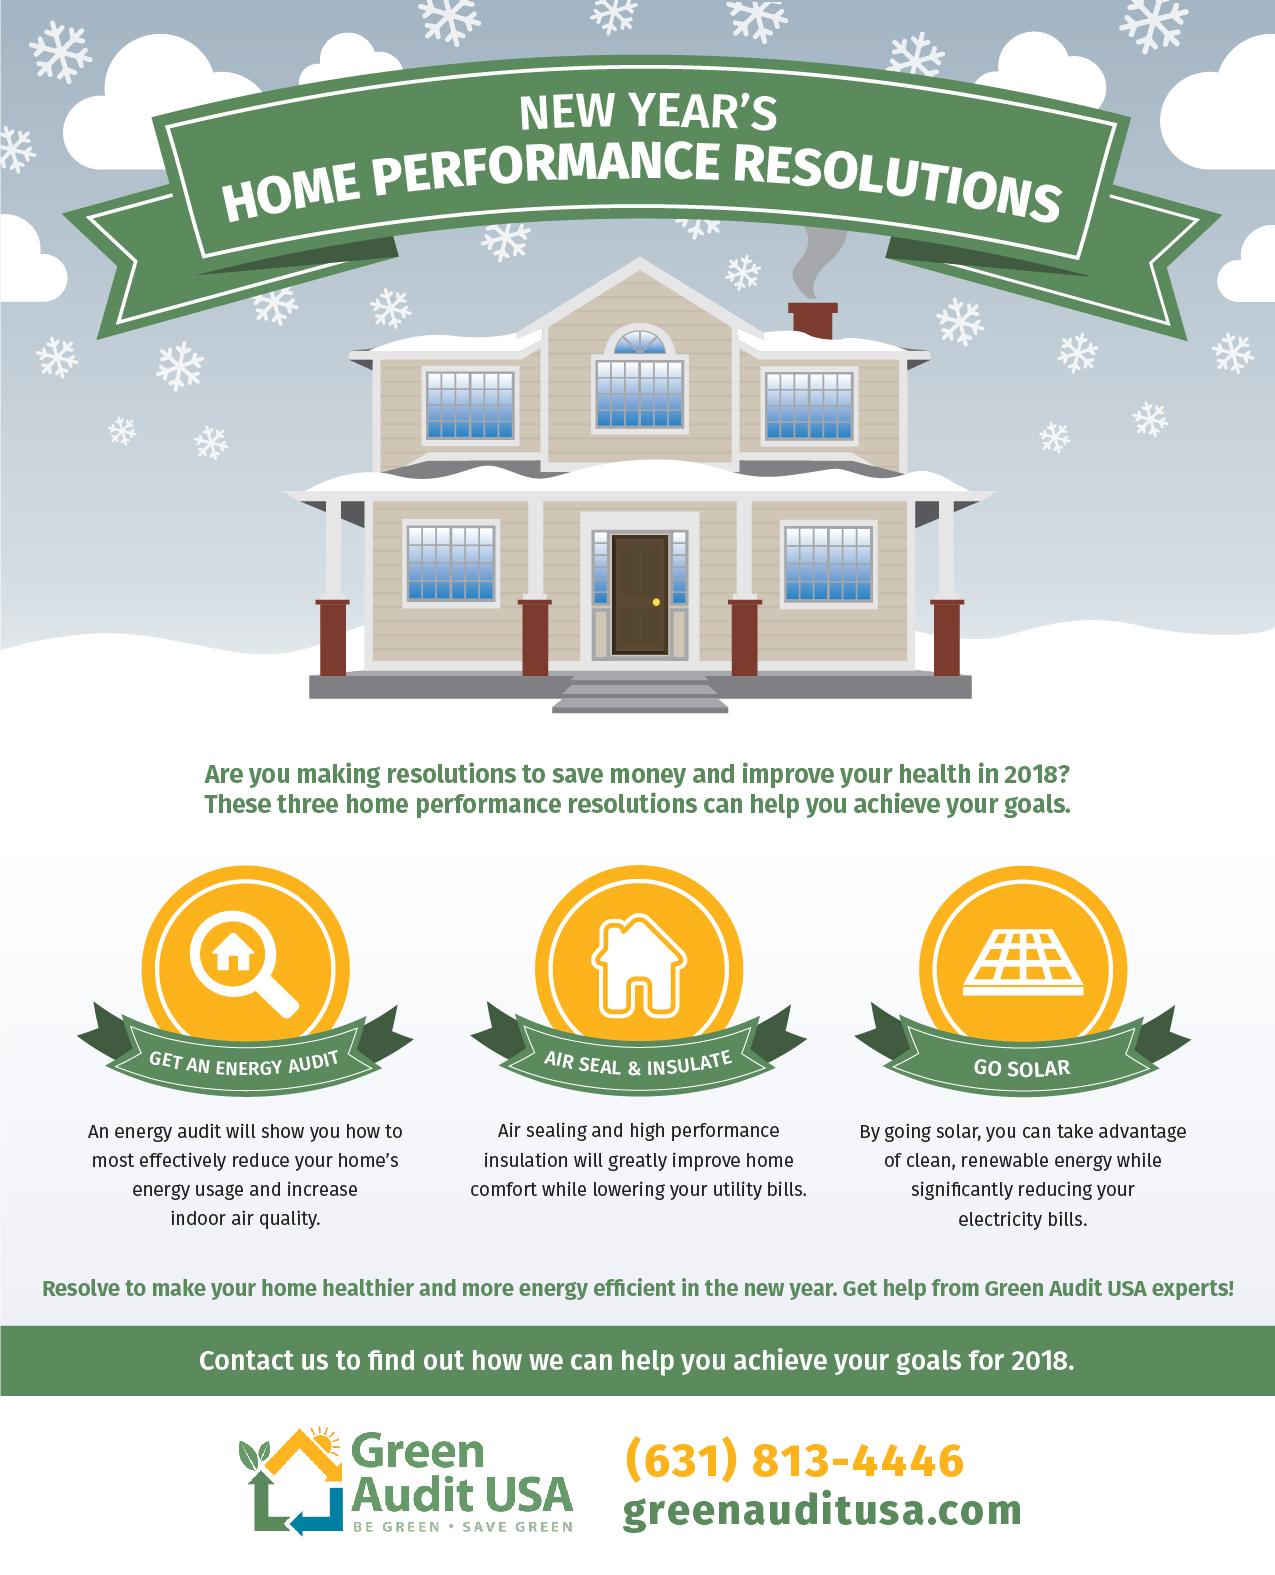 New Year’s Home Performance Resolutions, green audit usa, NY, energy aduit, air seal, insulation, solar